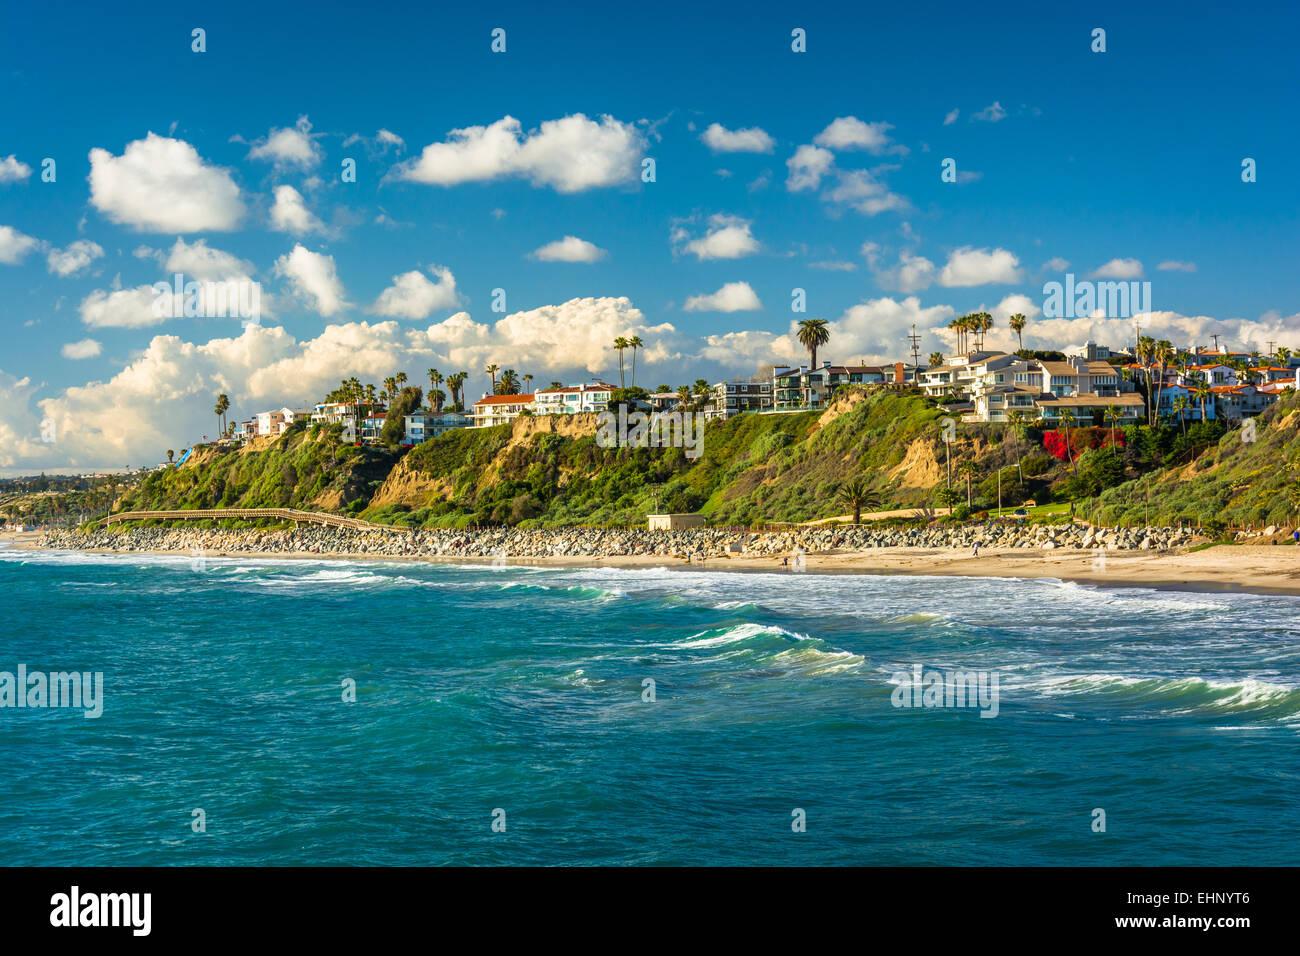 View of cliffs along the beach in San Clemente, California. Stock Photo